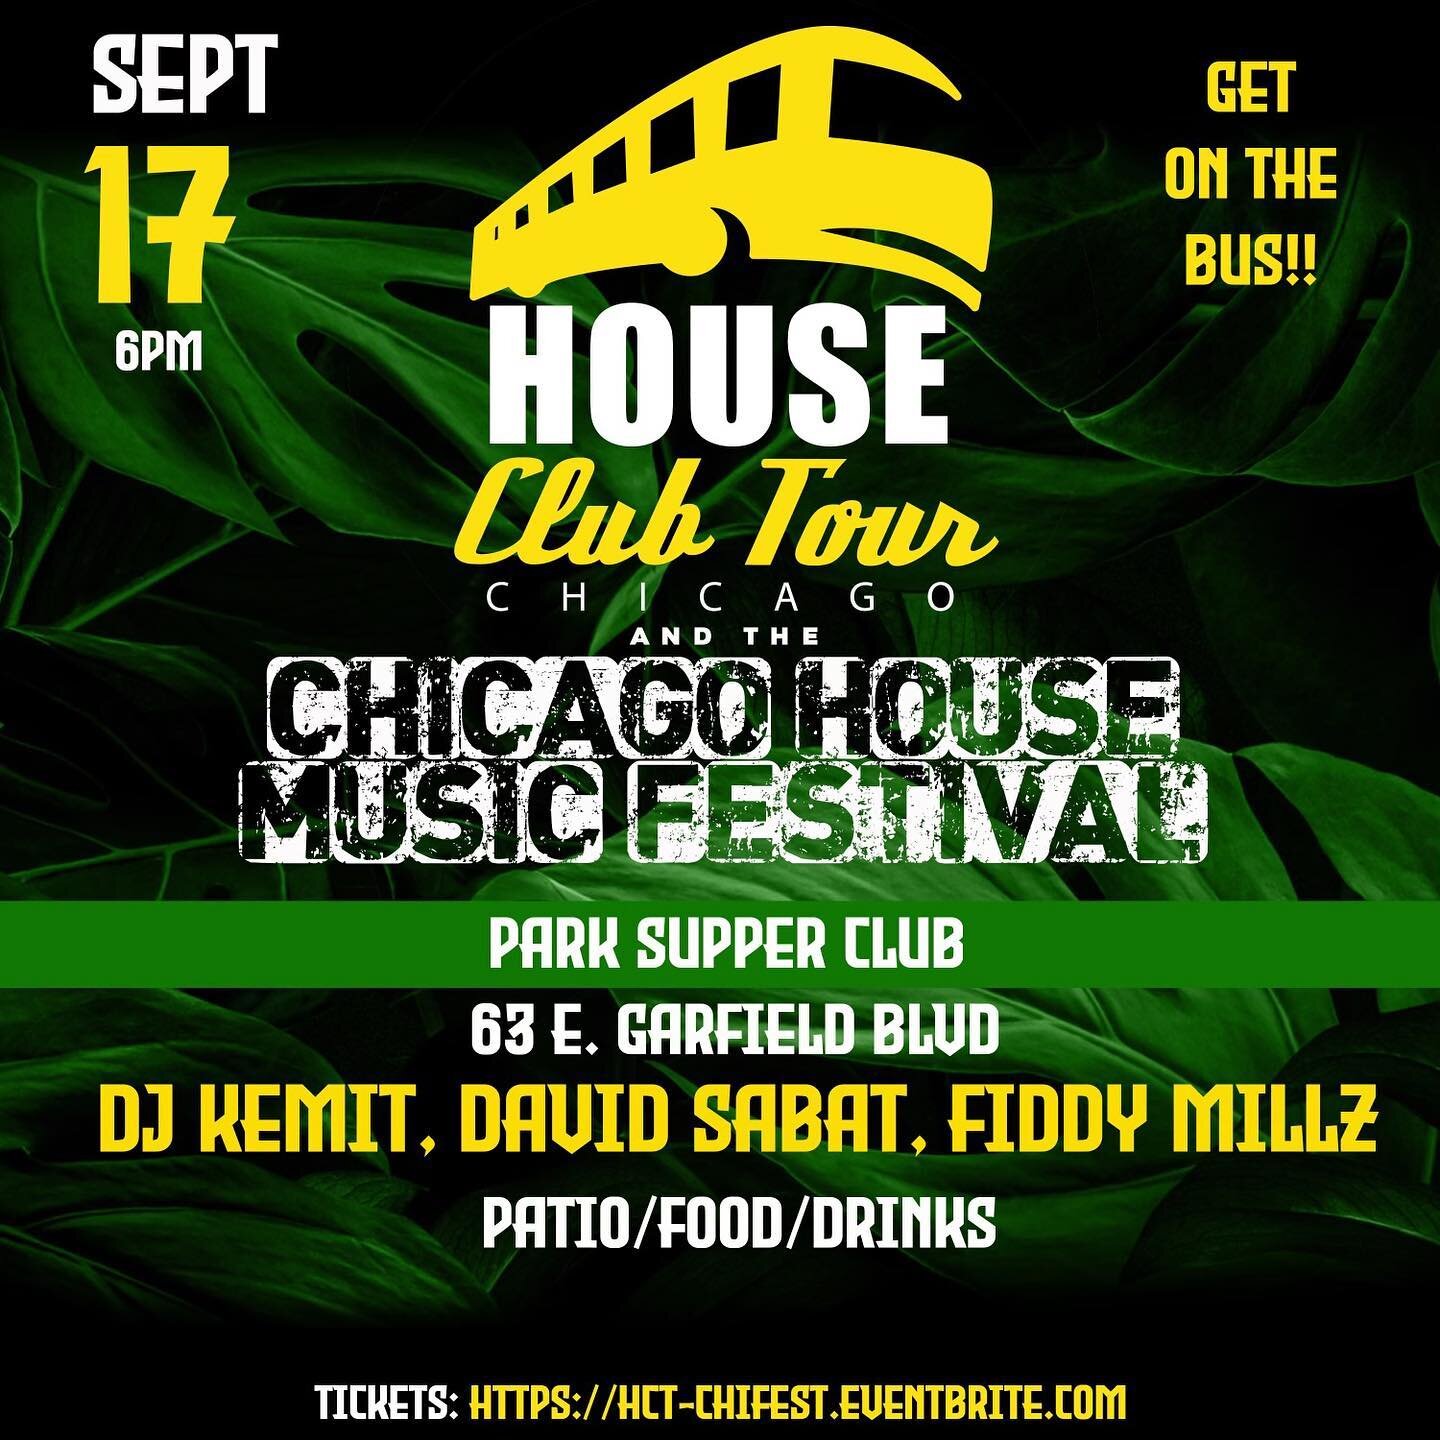 Saturday, Sept 17, 2022
House Club Tour Crawl to 9 Clubs
+ AFTER PARTY@ Le Nocturne Chicago
Raffle &amp; Download $20-$35
Tickets: https://hct-chifest.eventbrite.com